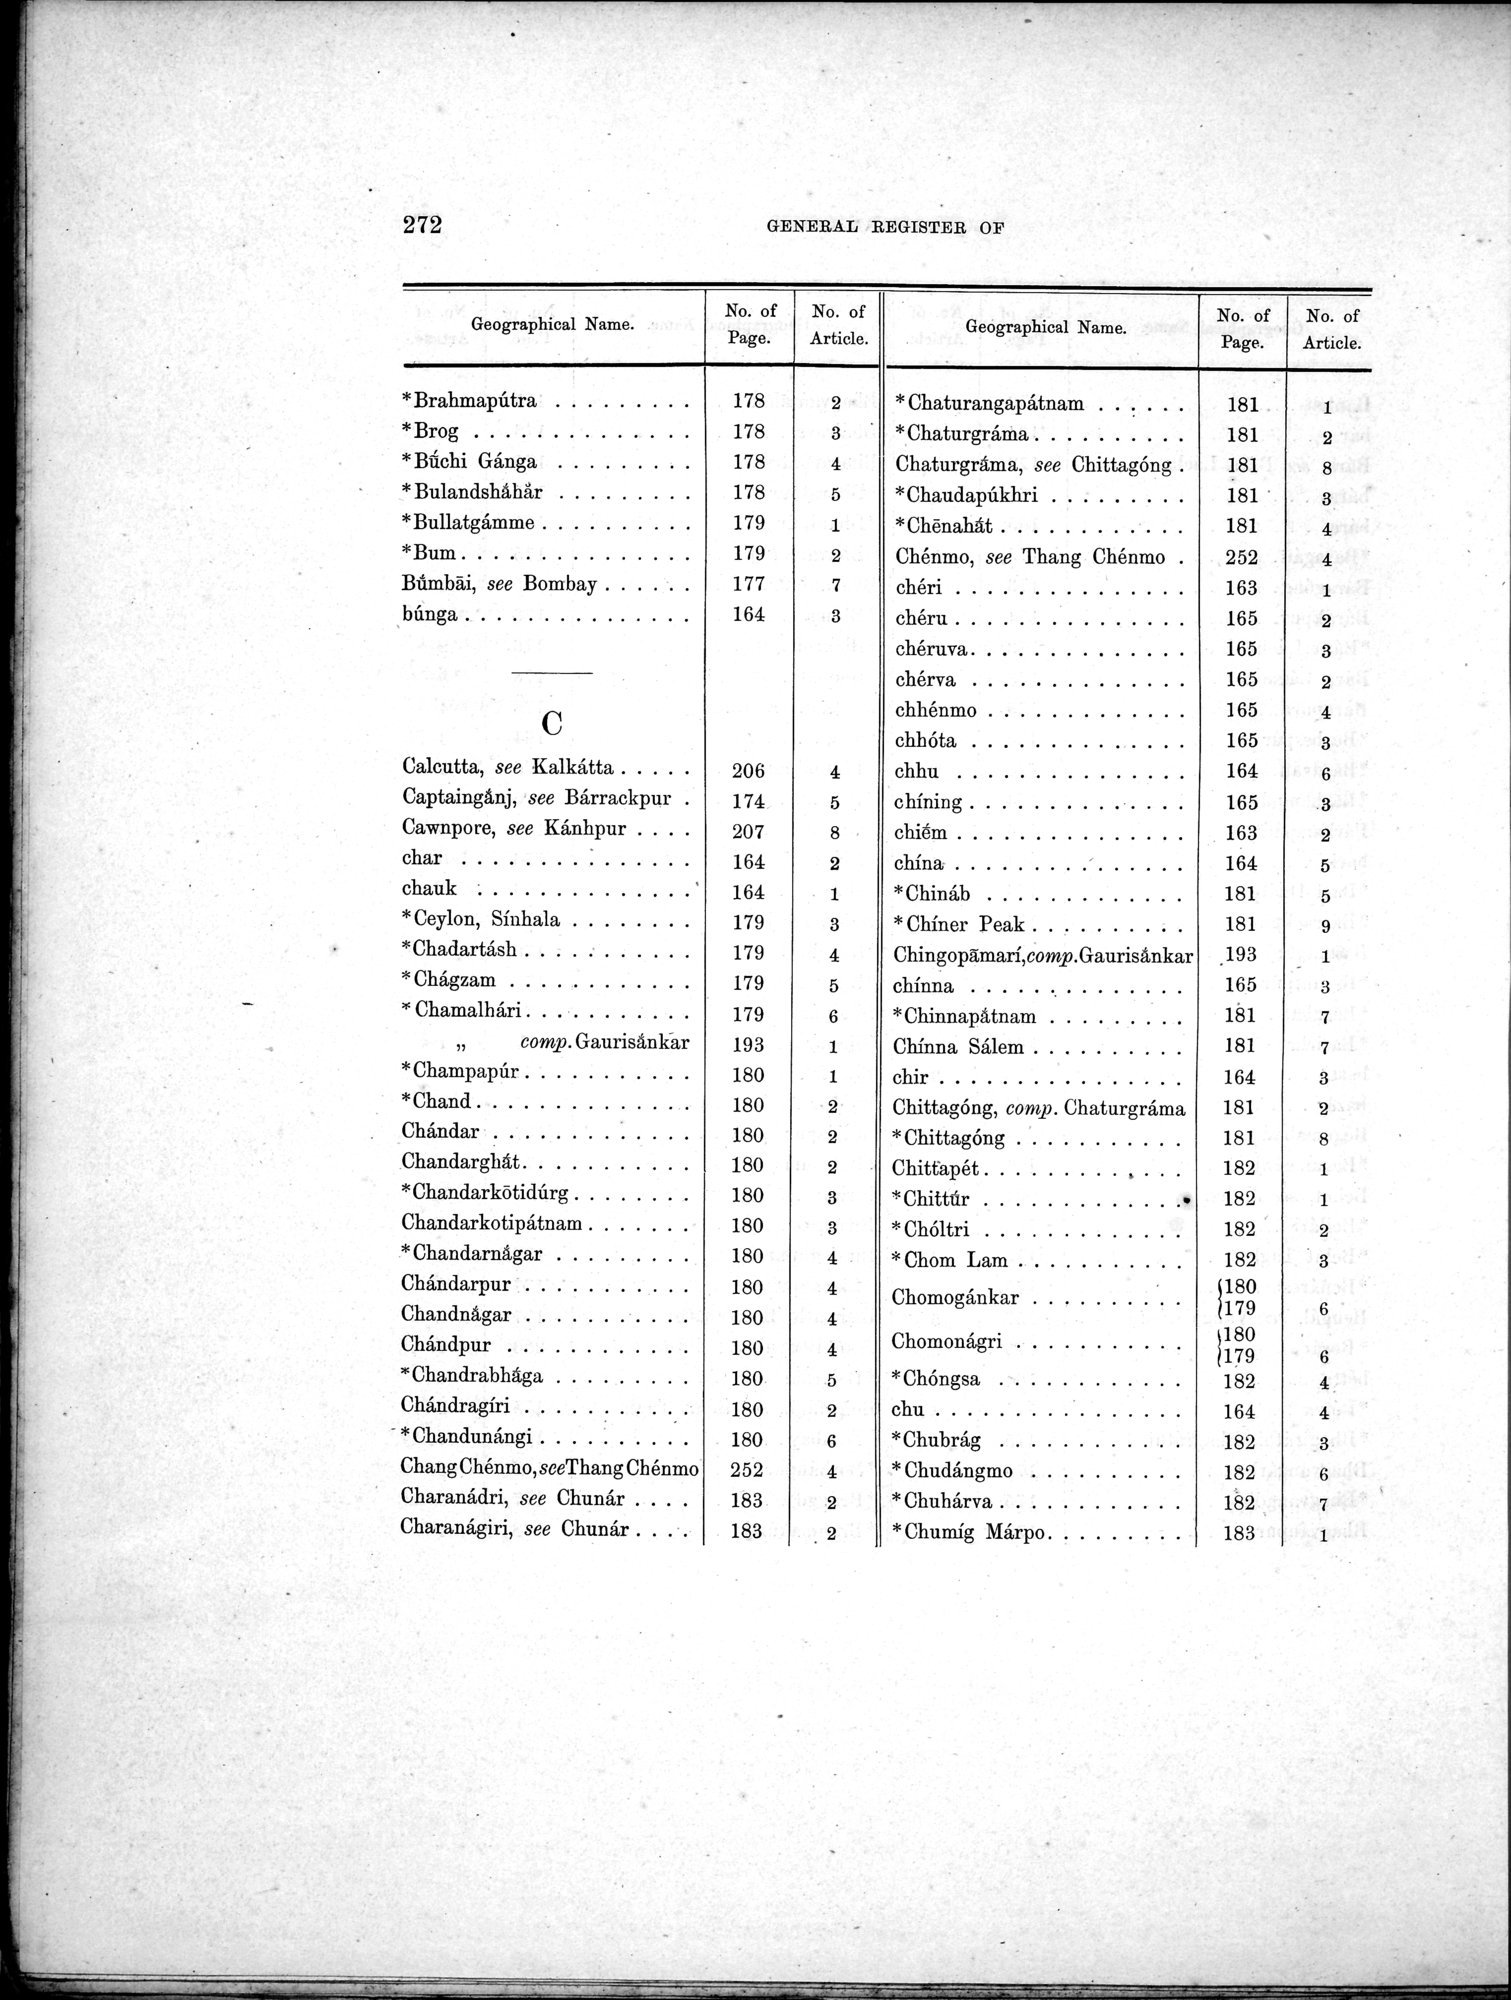 Results of a Scientific Mission to India and High Asia : vol.3 / Page 304 (Grayscale High Resolution Image)